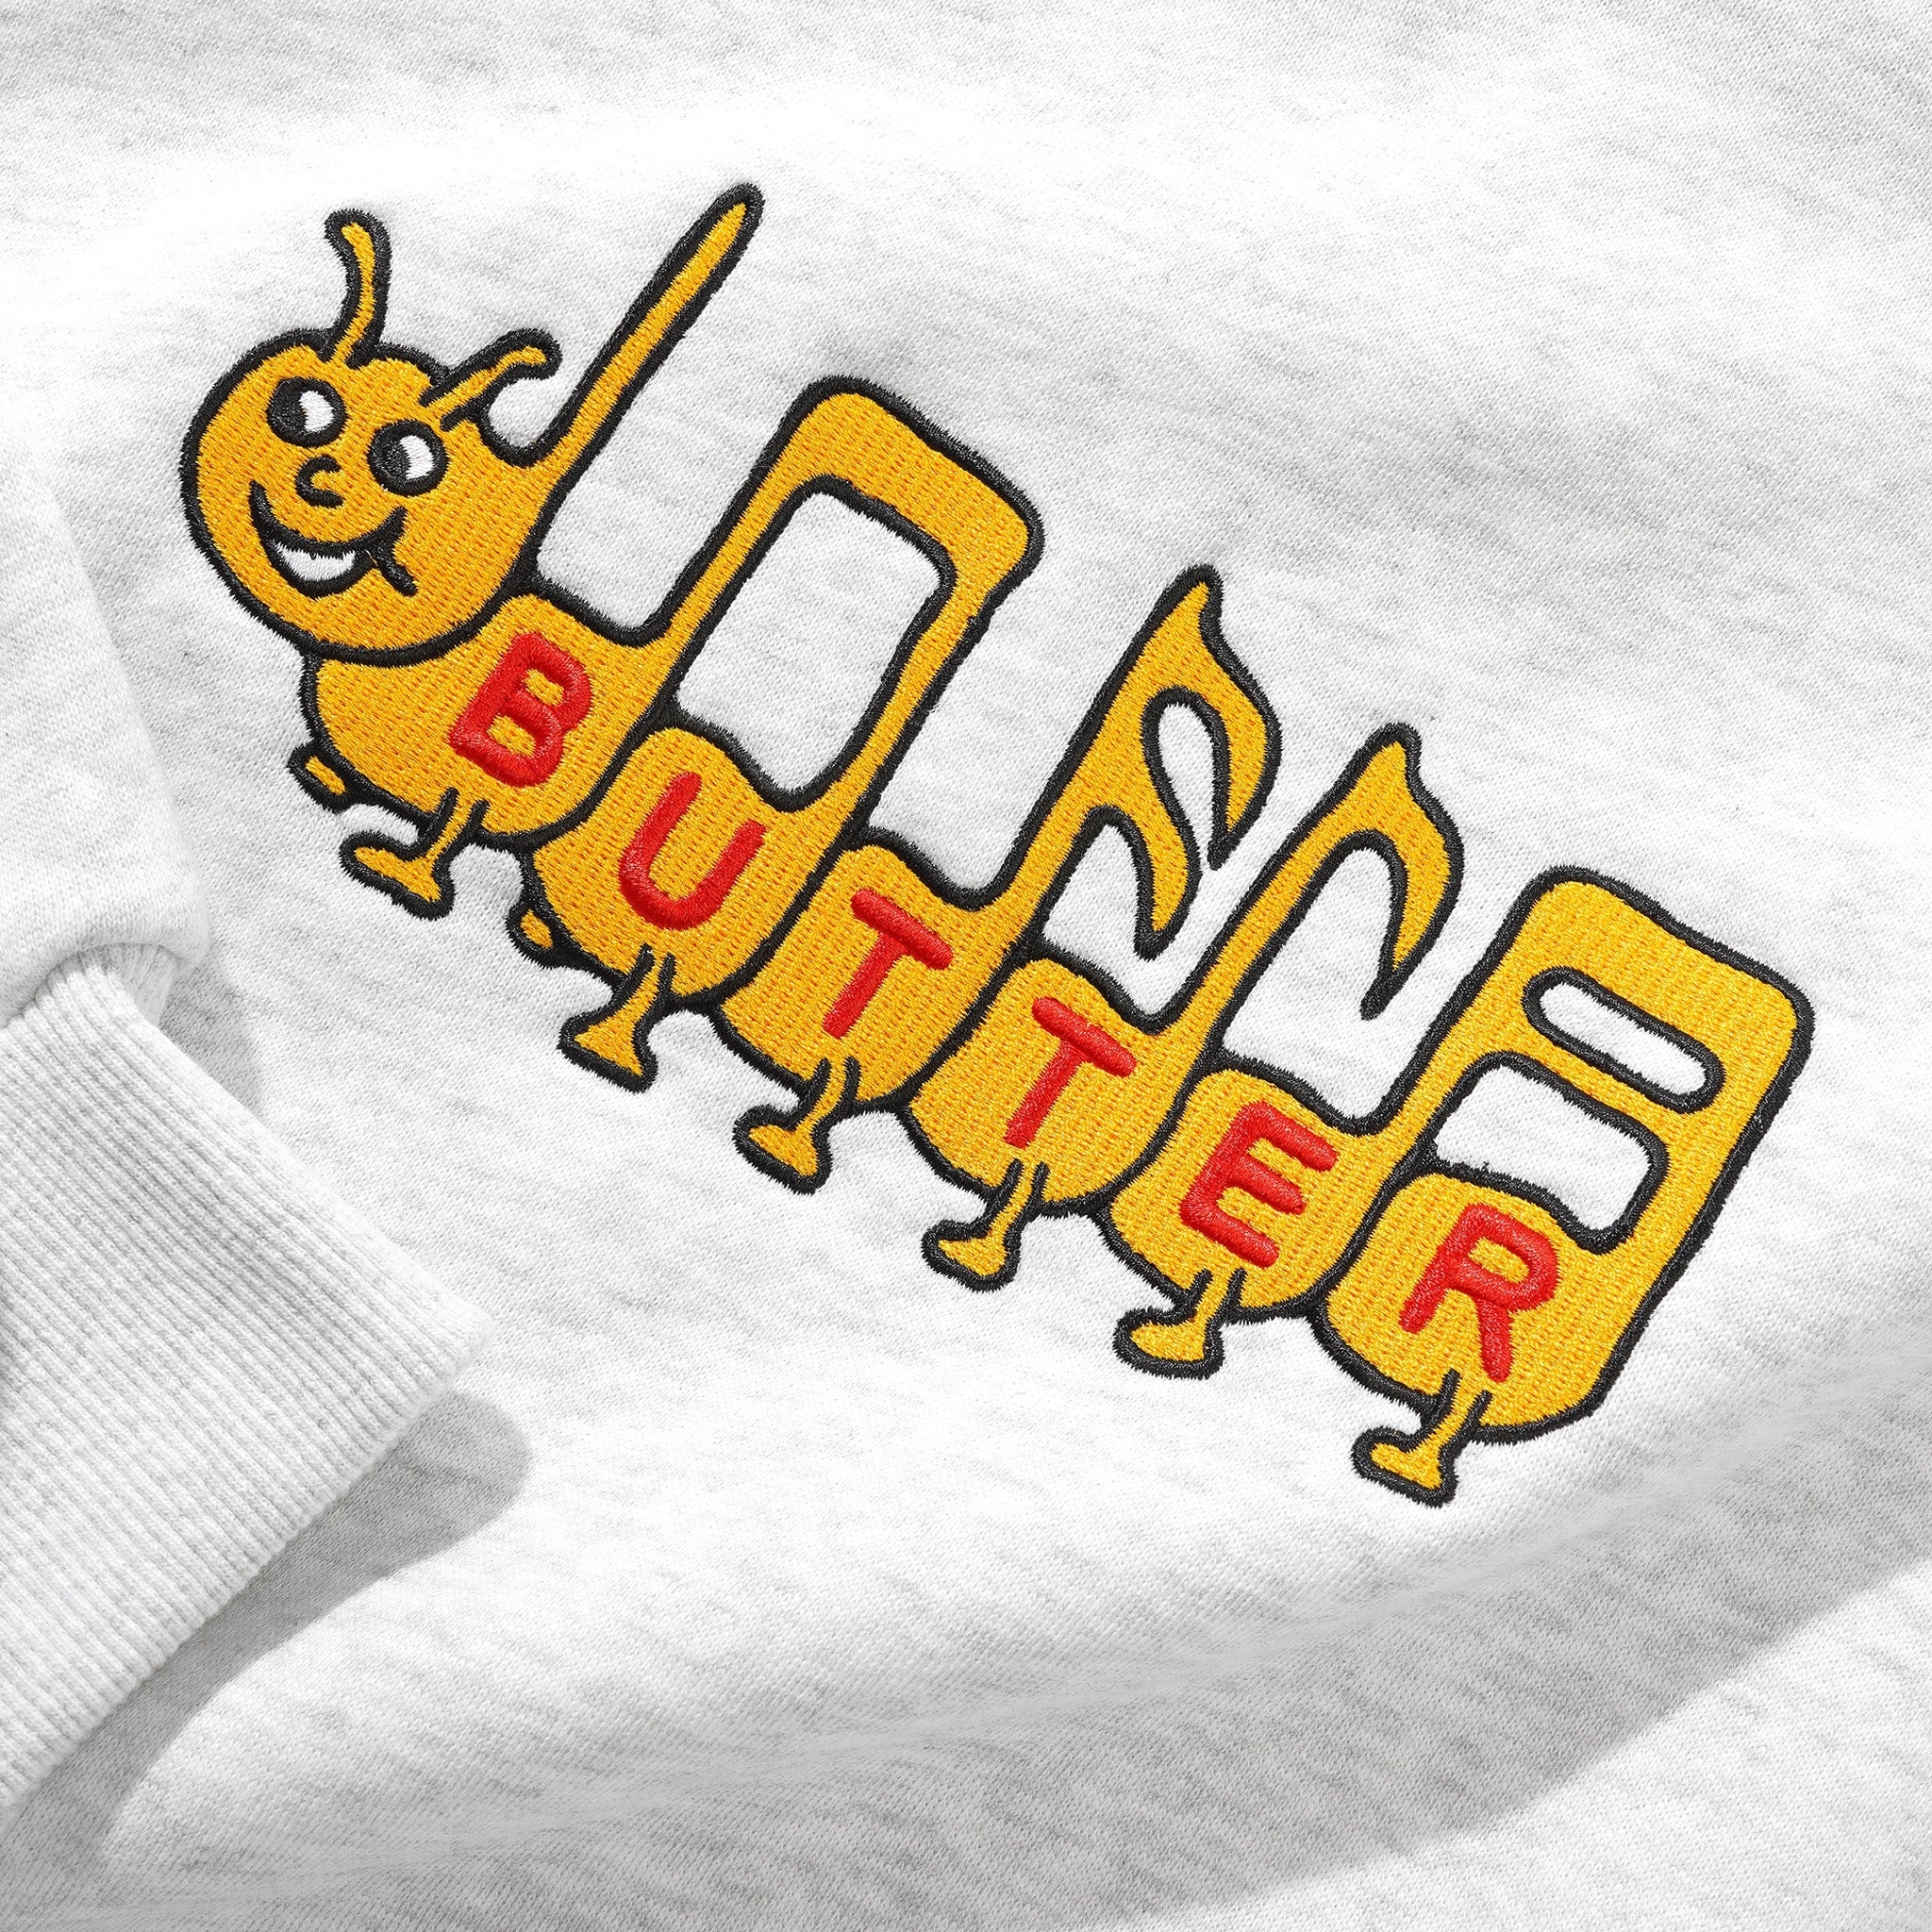 Butter Goods Caterpillar Embroidered Pullover Hoodie (Ash) - August Shop